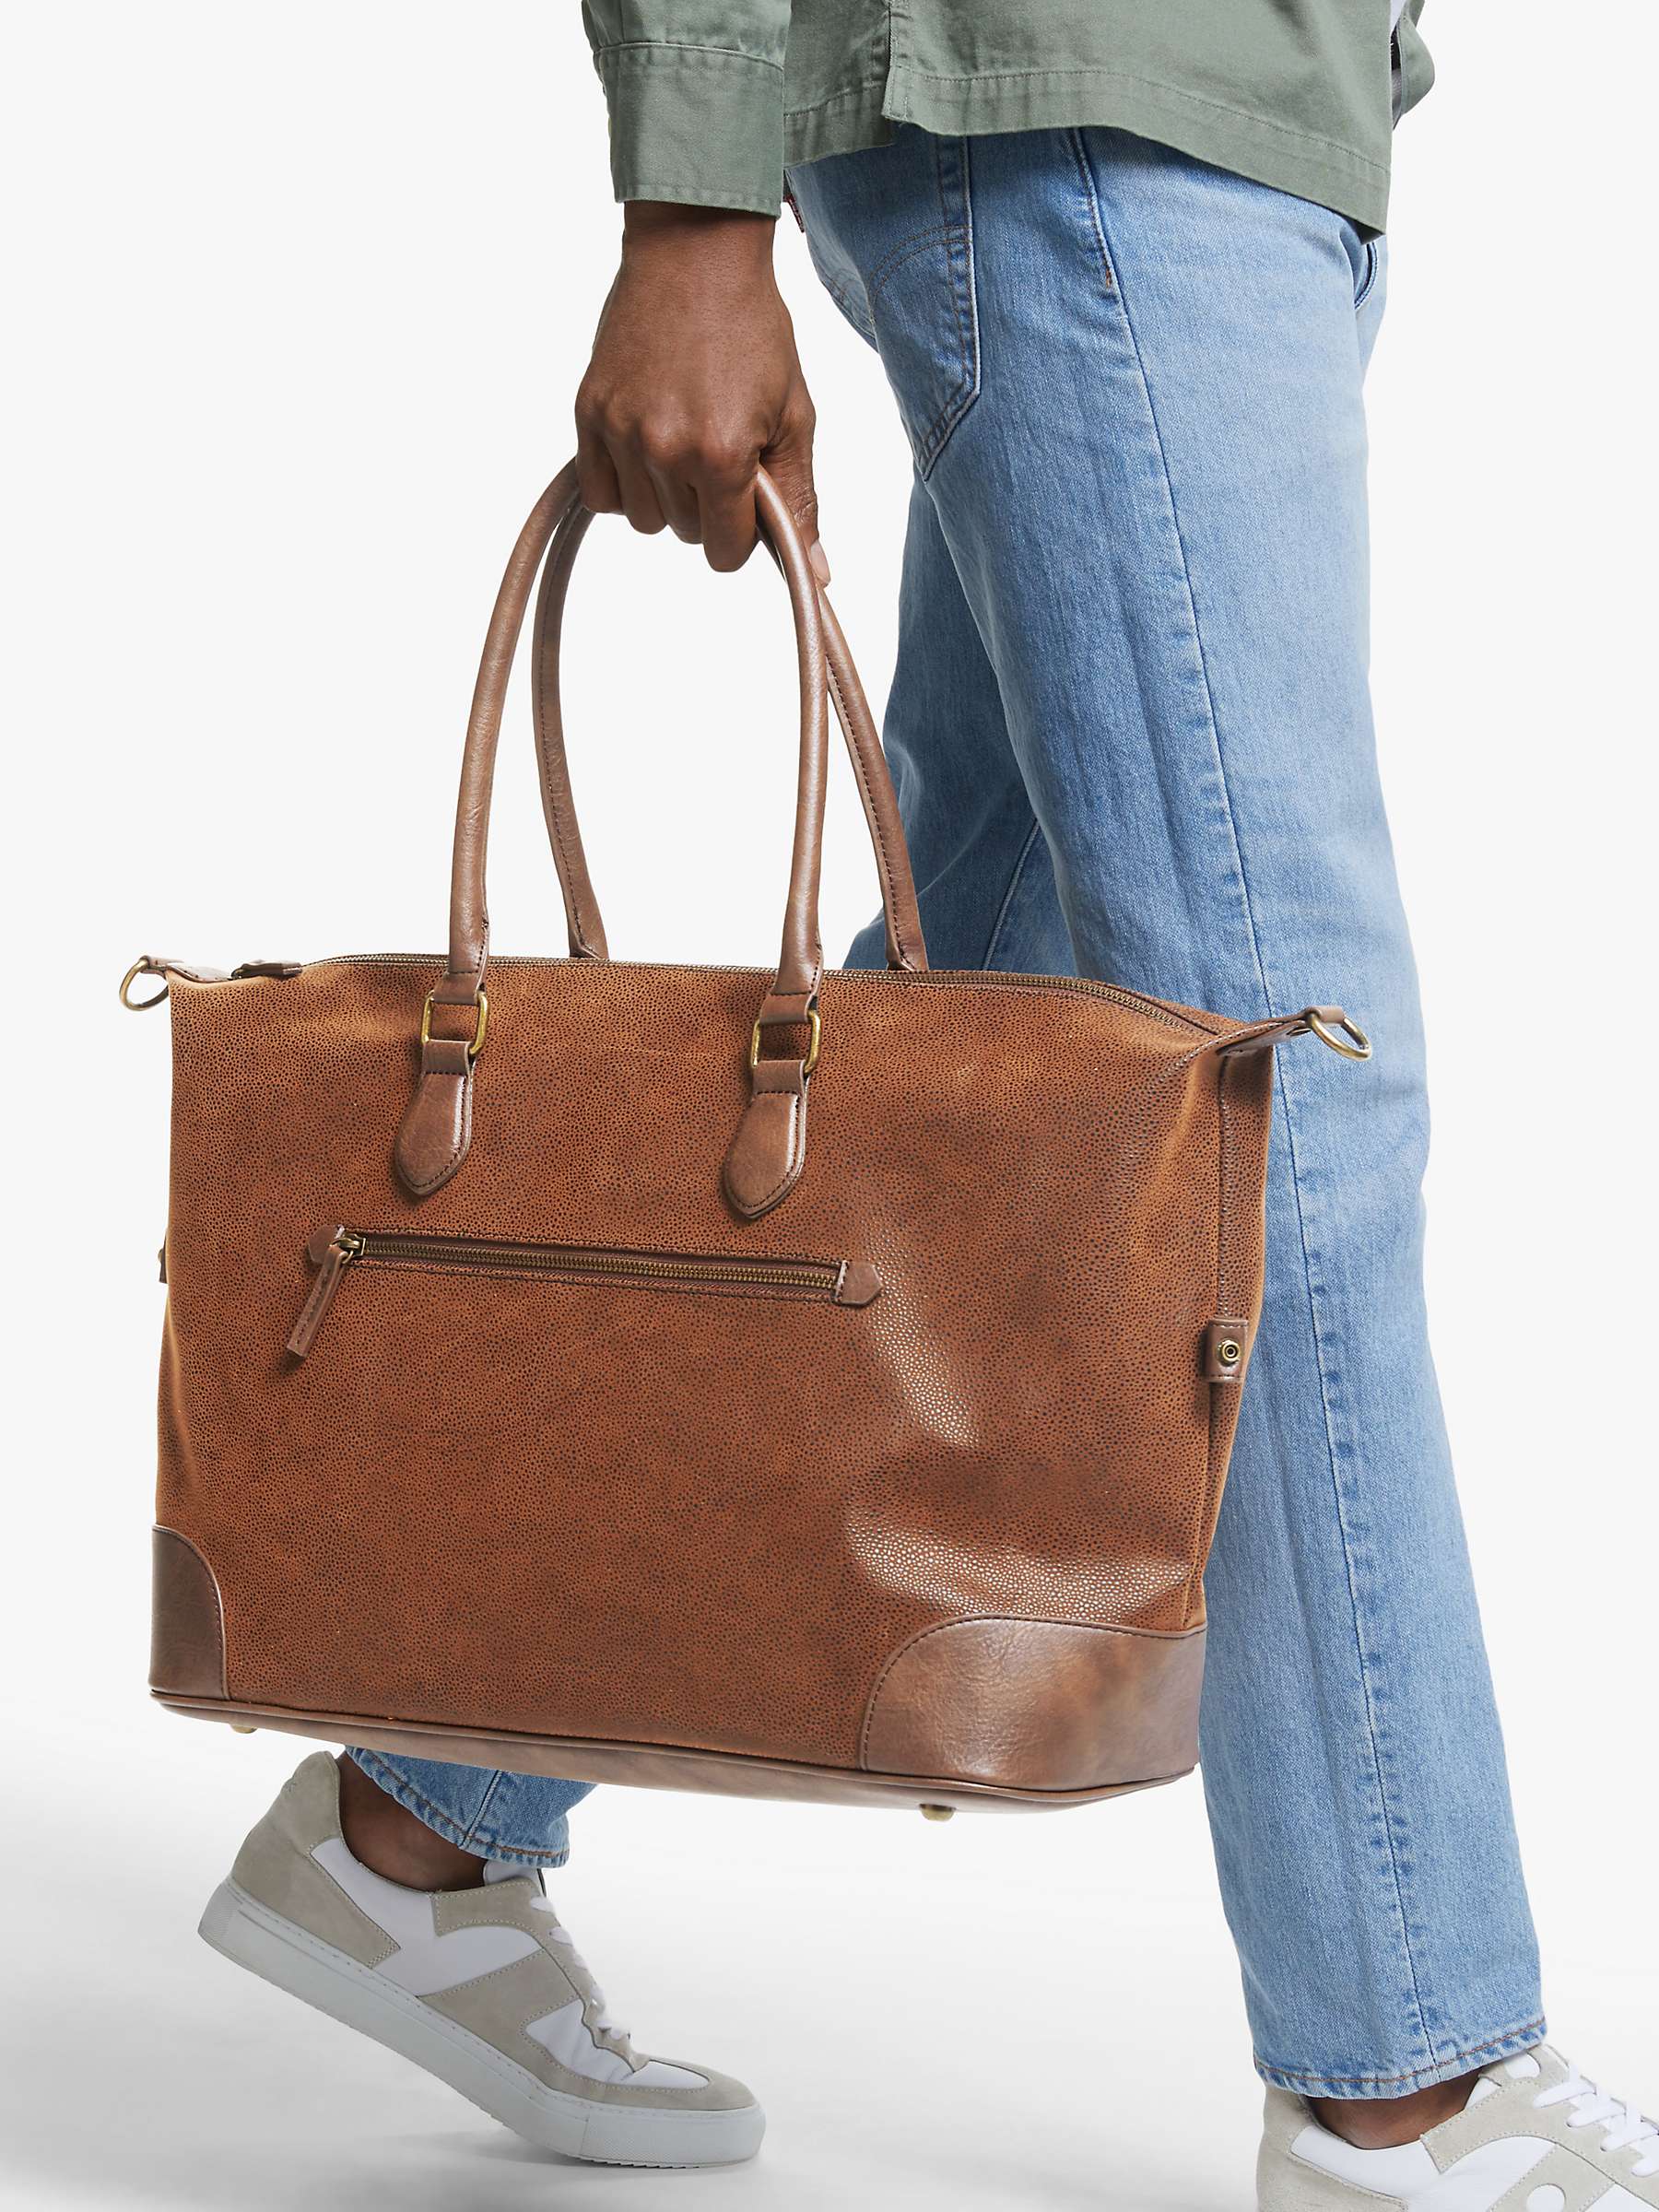 Buy John Lewis Small Cambridge Holdall Online at johnlewis.com